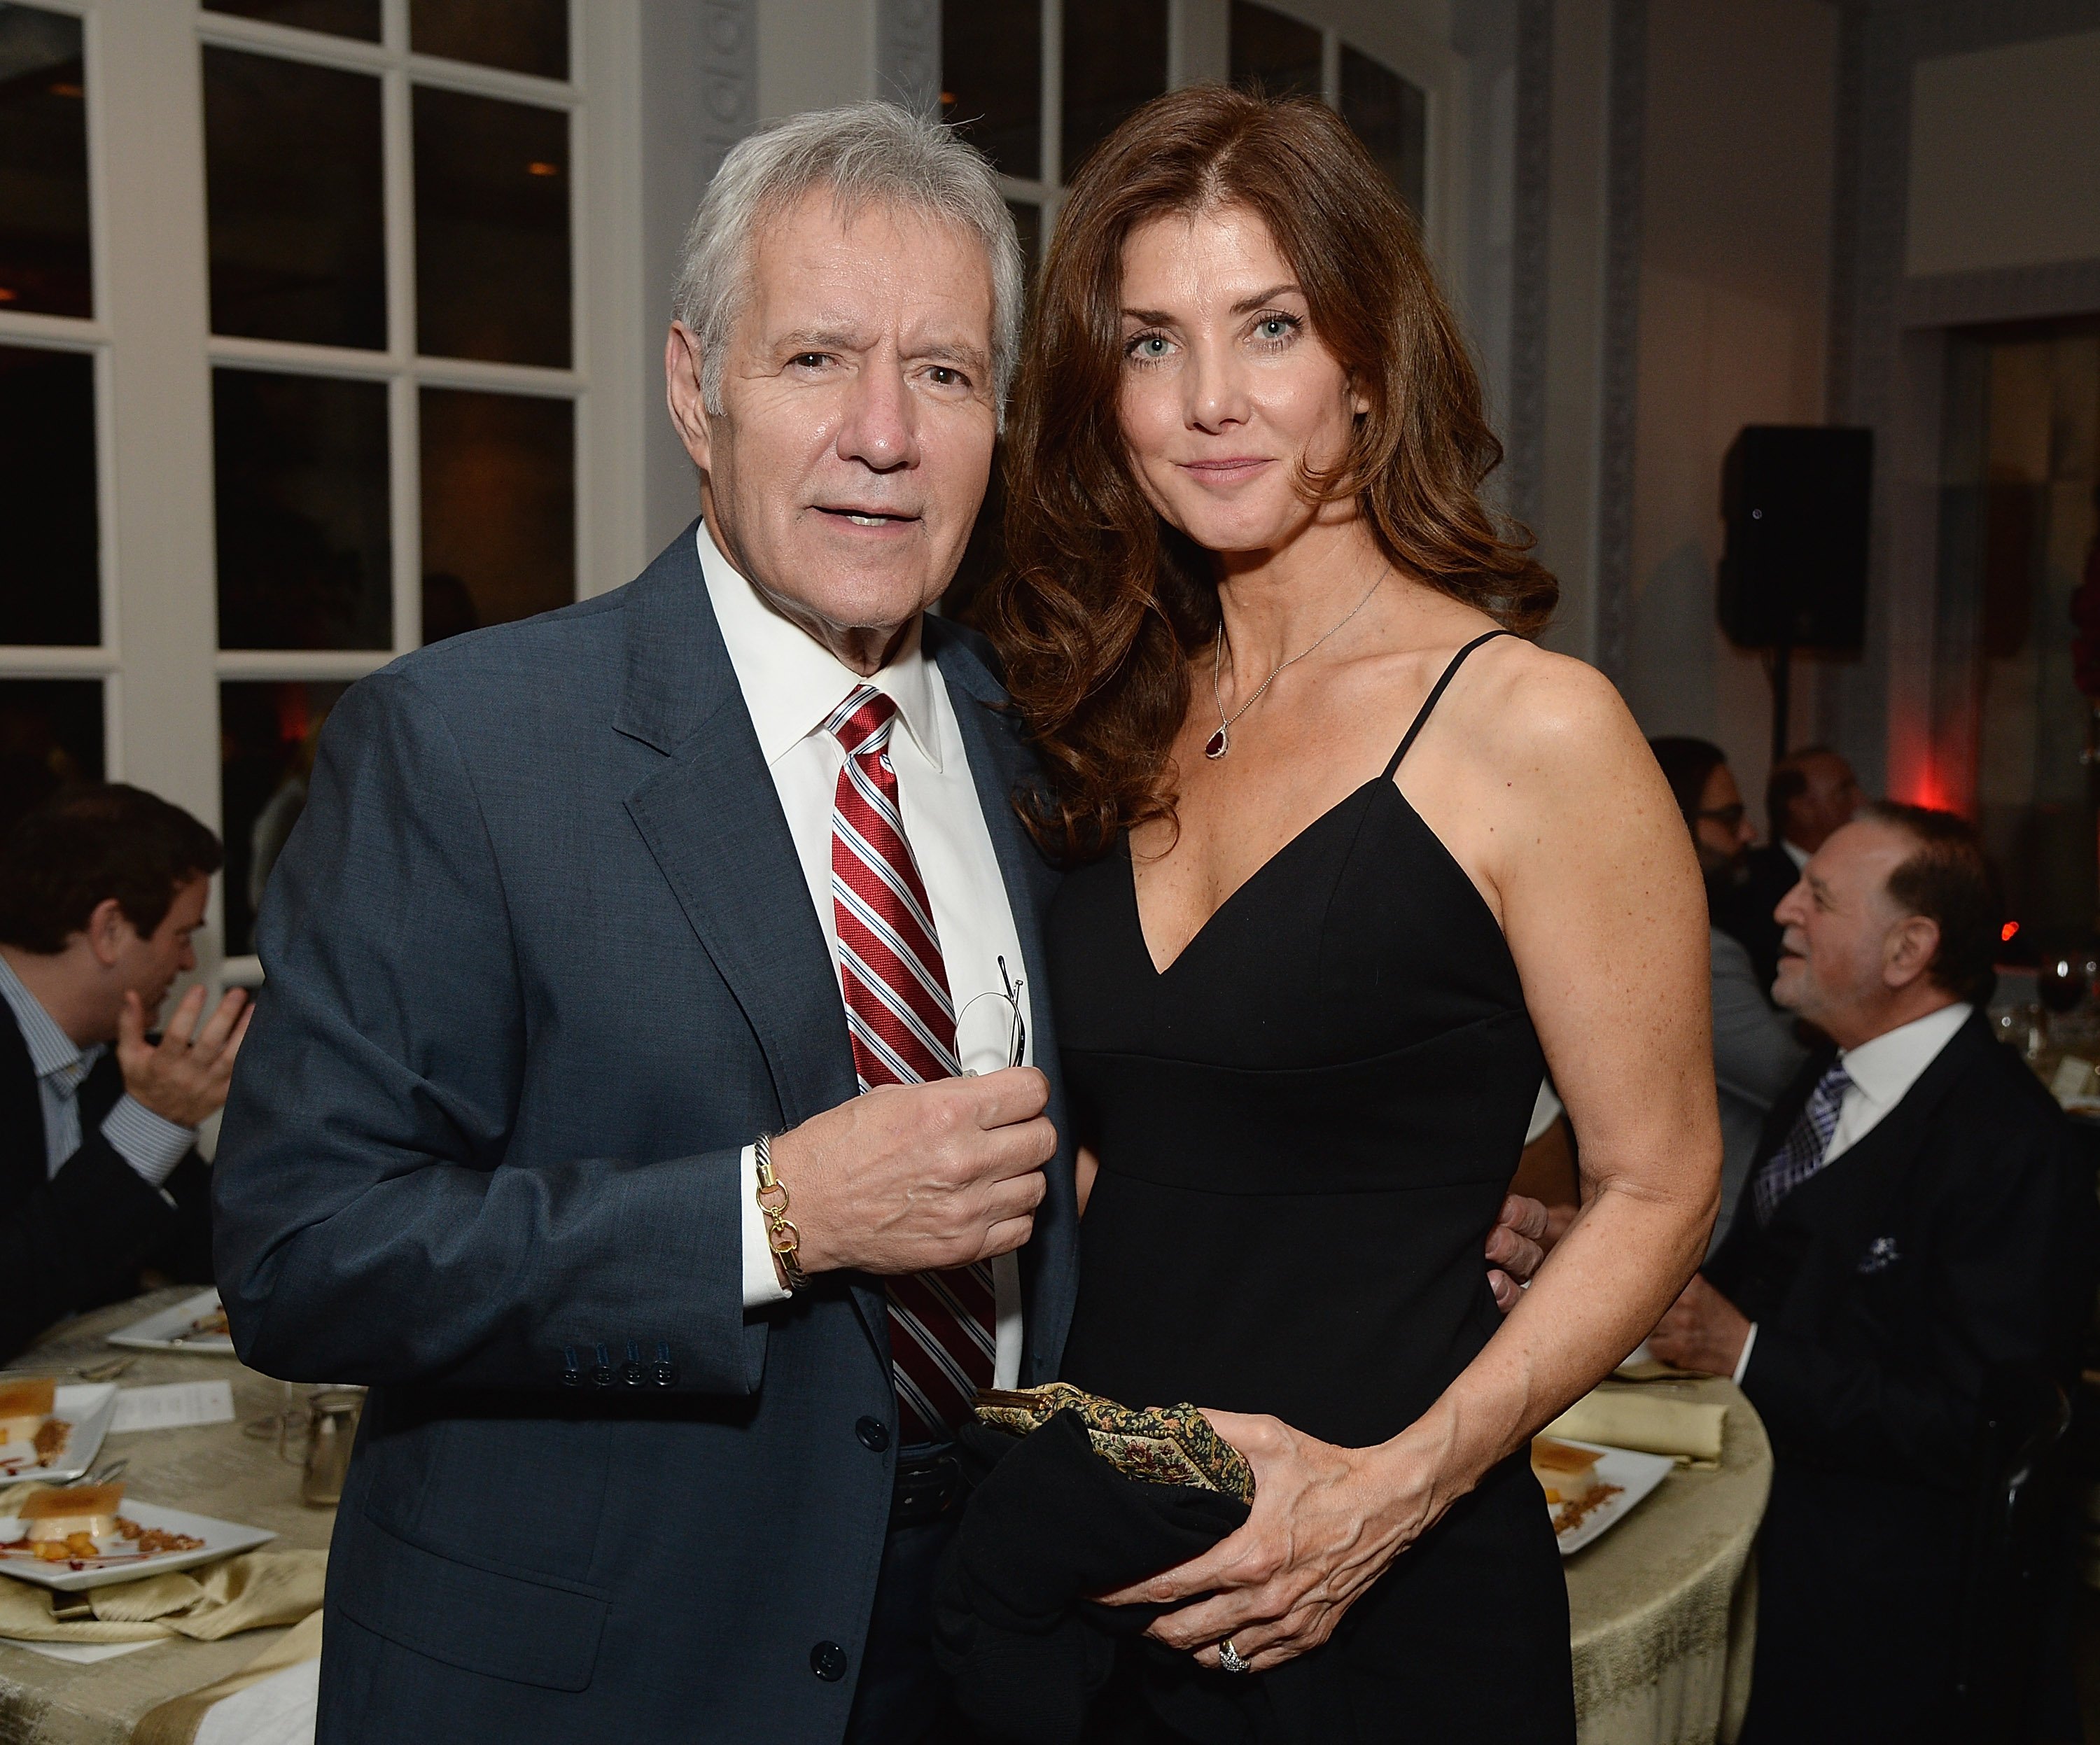 Trebek and his wife of 29 years, Jane Currivan. | Image credit: Getty/Global Images Ukraine